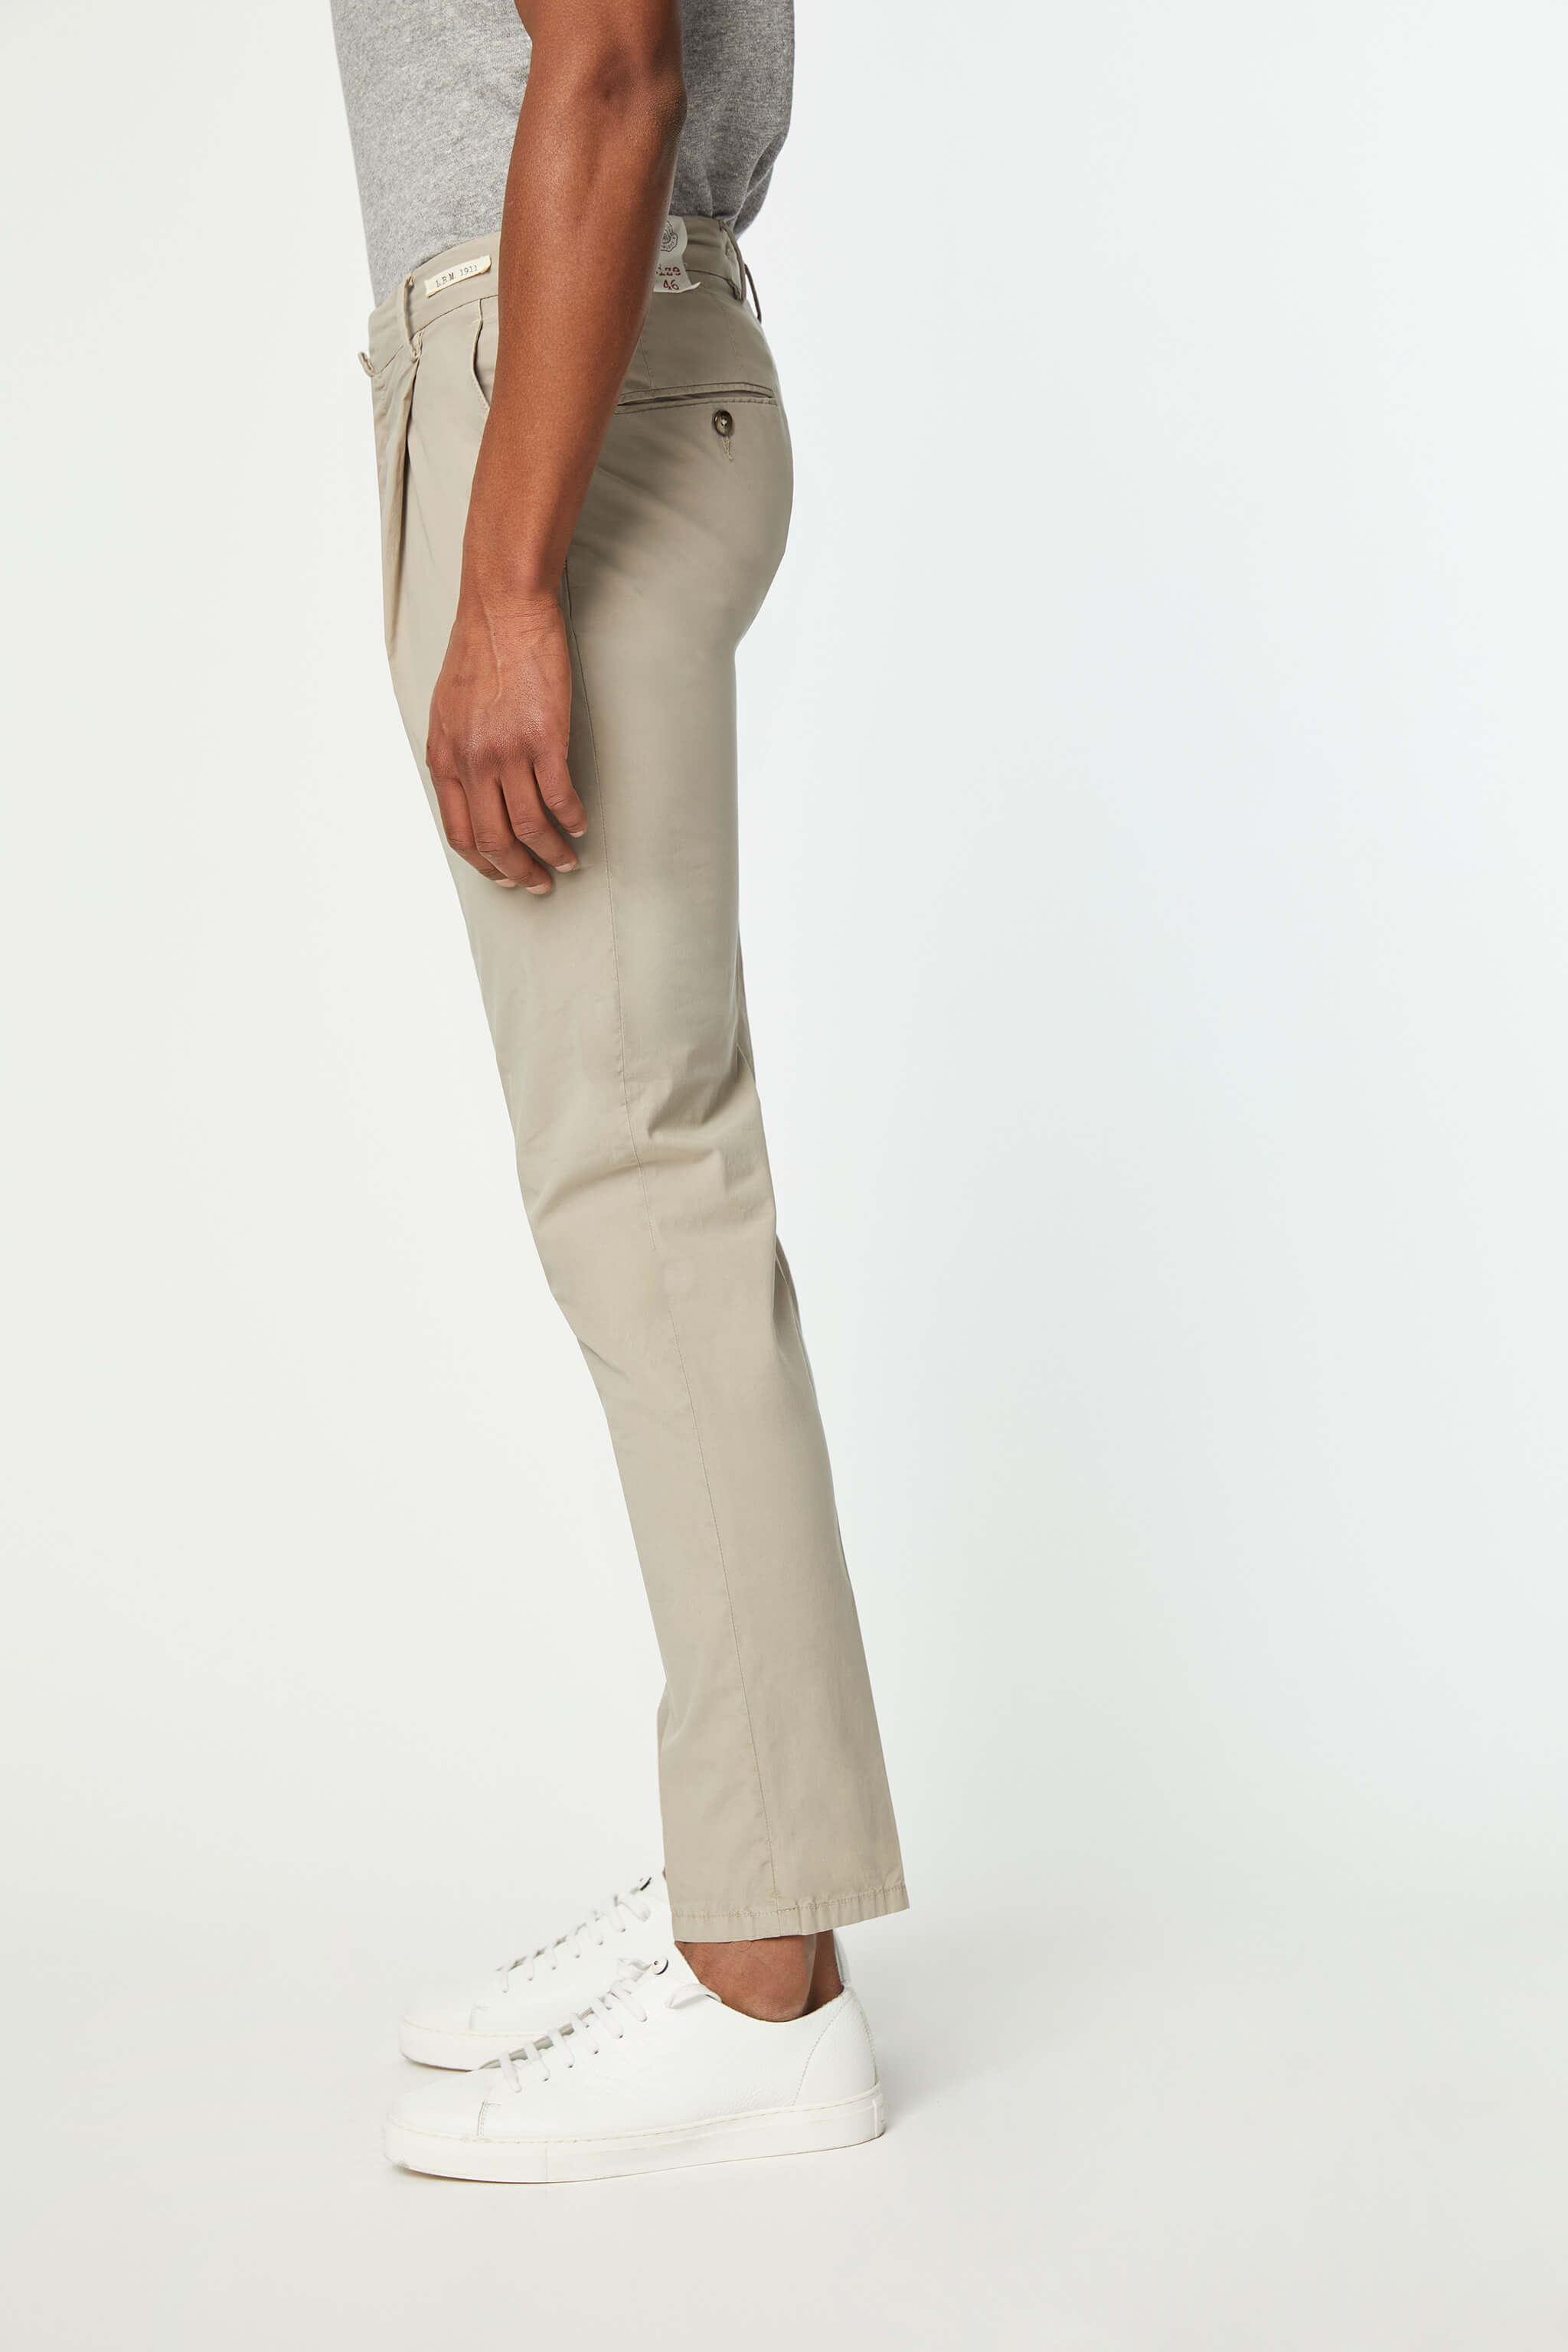 Garment-dyed MUDDY pants in Beige